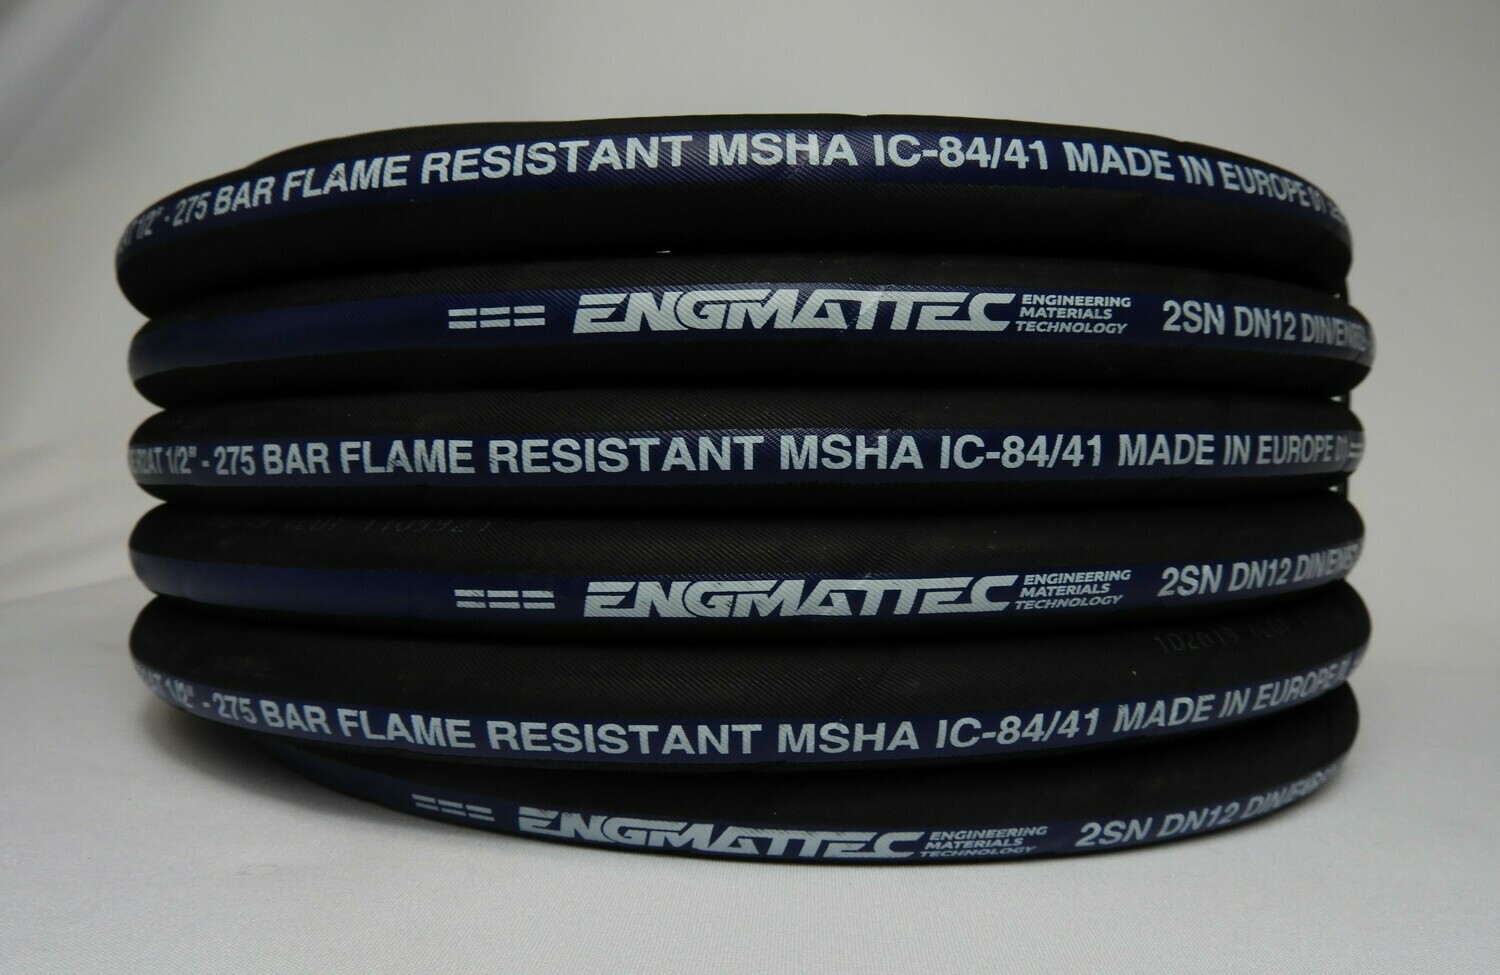 PSI 4000 2 WIRE HYDRAULIC HOSE 125 FT R2T08  1/2  SAE W.P 